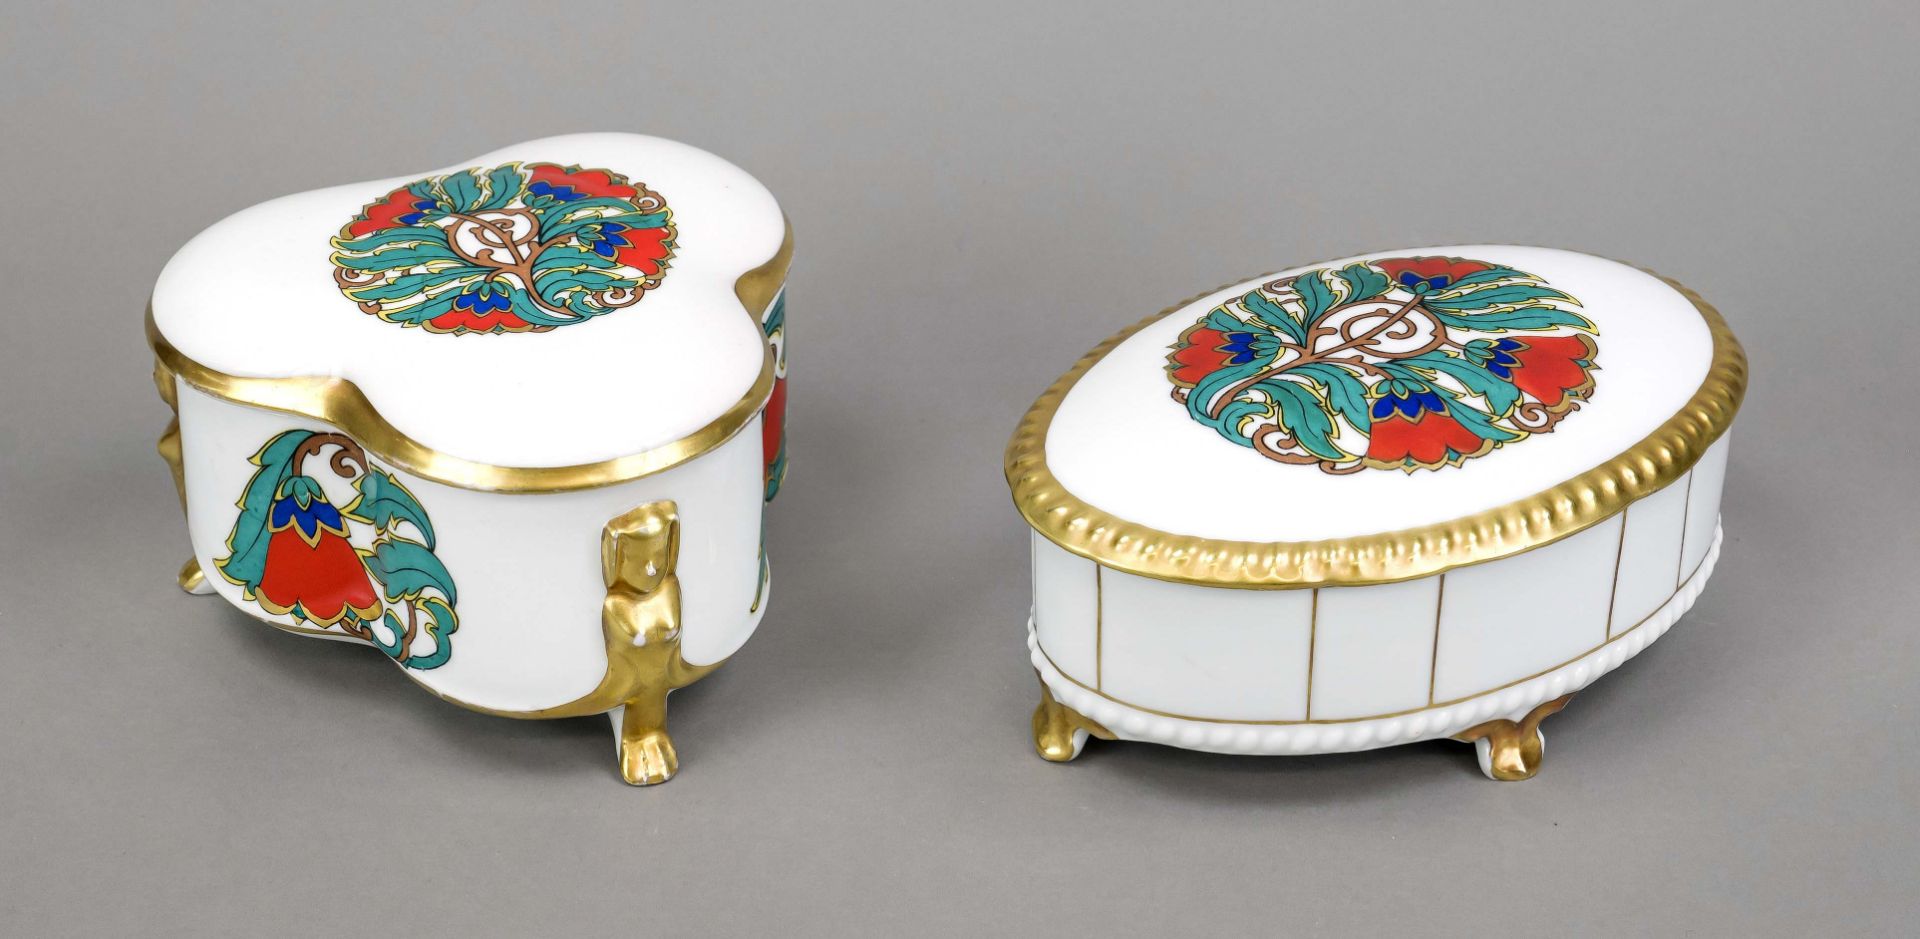 Two Art Deco lidded boxes, Baensch Lettin, marks 1927-45, corresponding polychrome decoration with